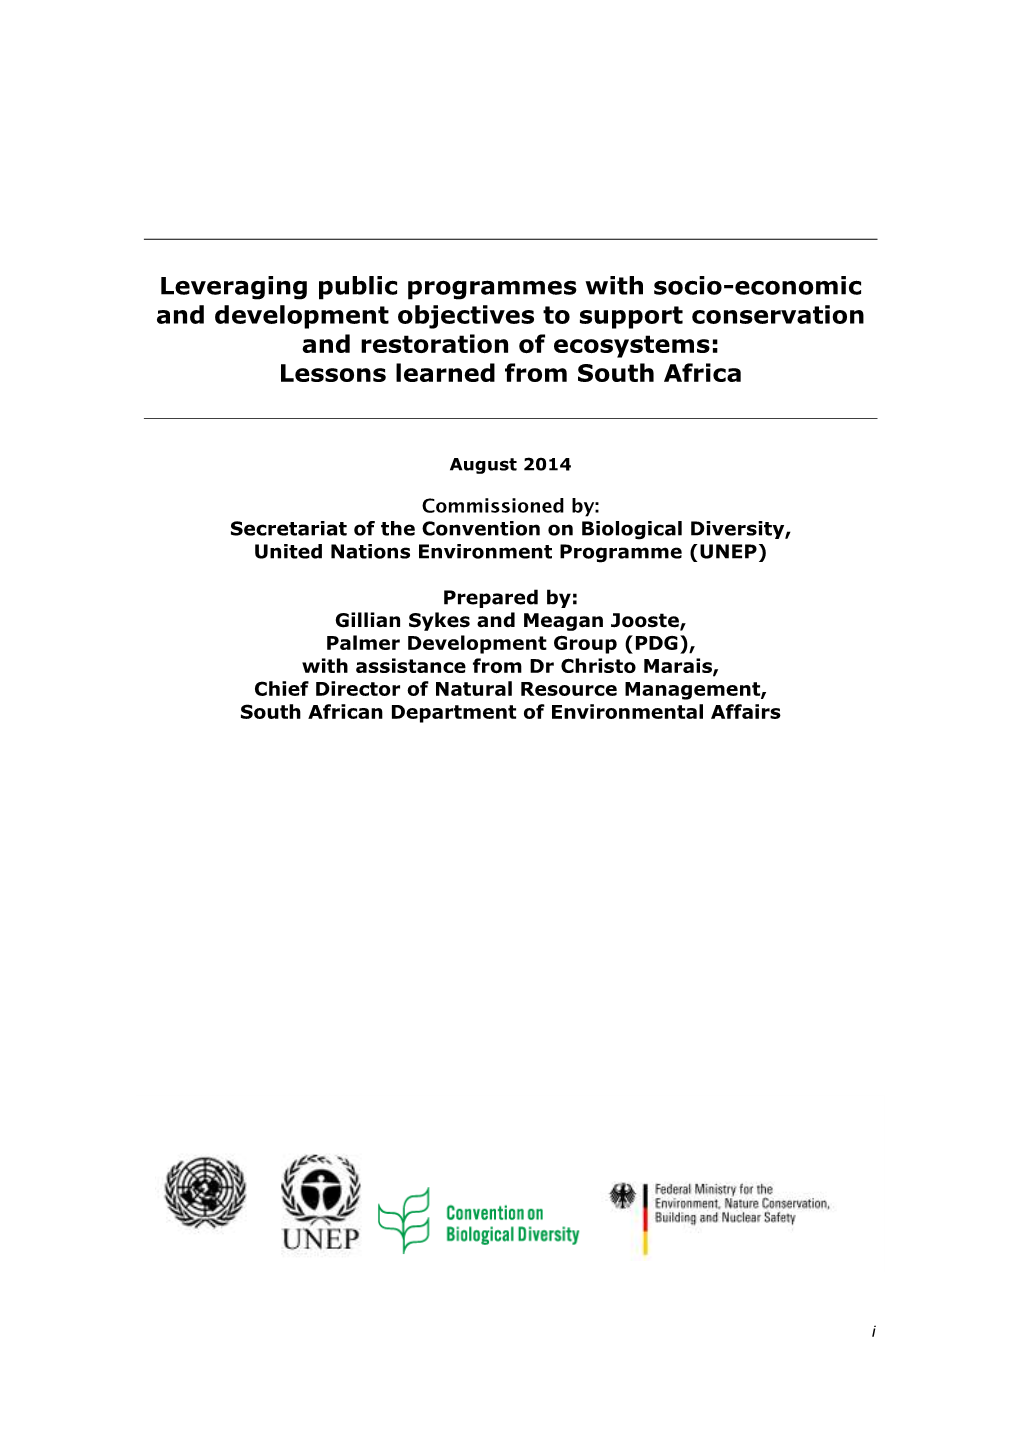 Leveraging Public Programmes with Socio-Economic and Development Objectives to Support Conservation and Restoration of Ecosystems: Lessons Learned from South Africa